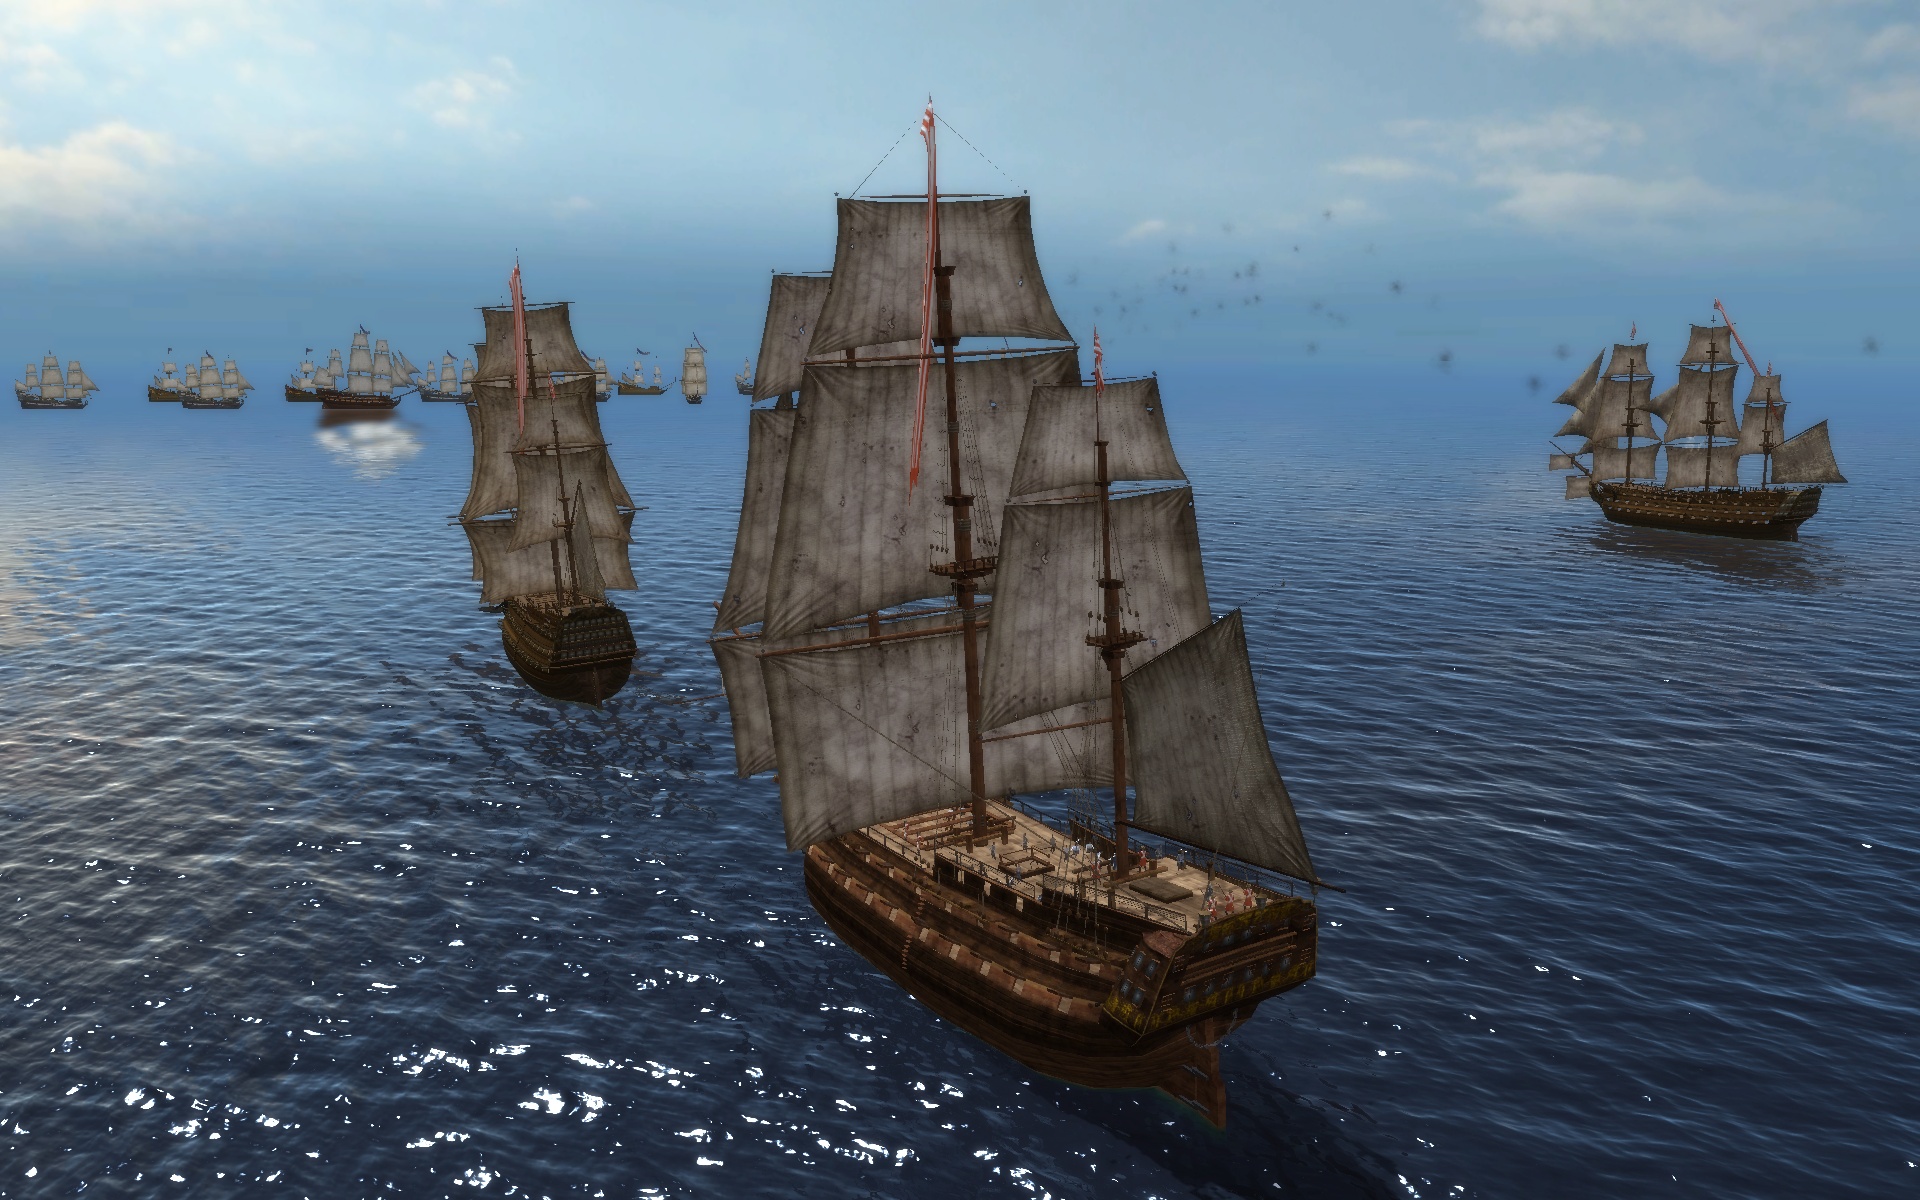 Commander: Conquest of the Americas - Colonial Navy screenshot